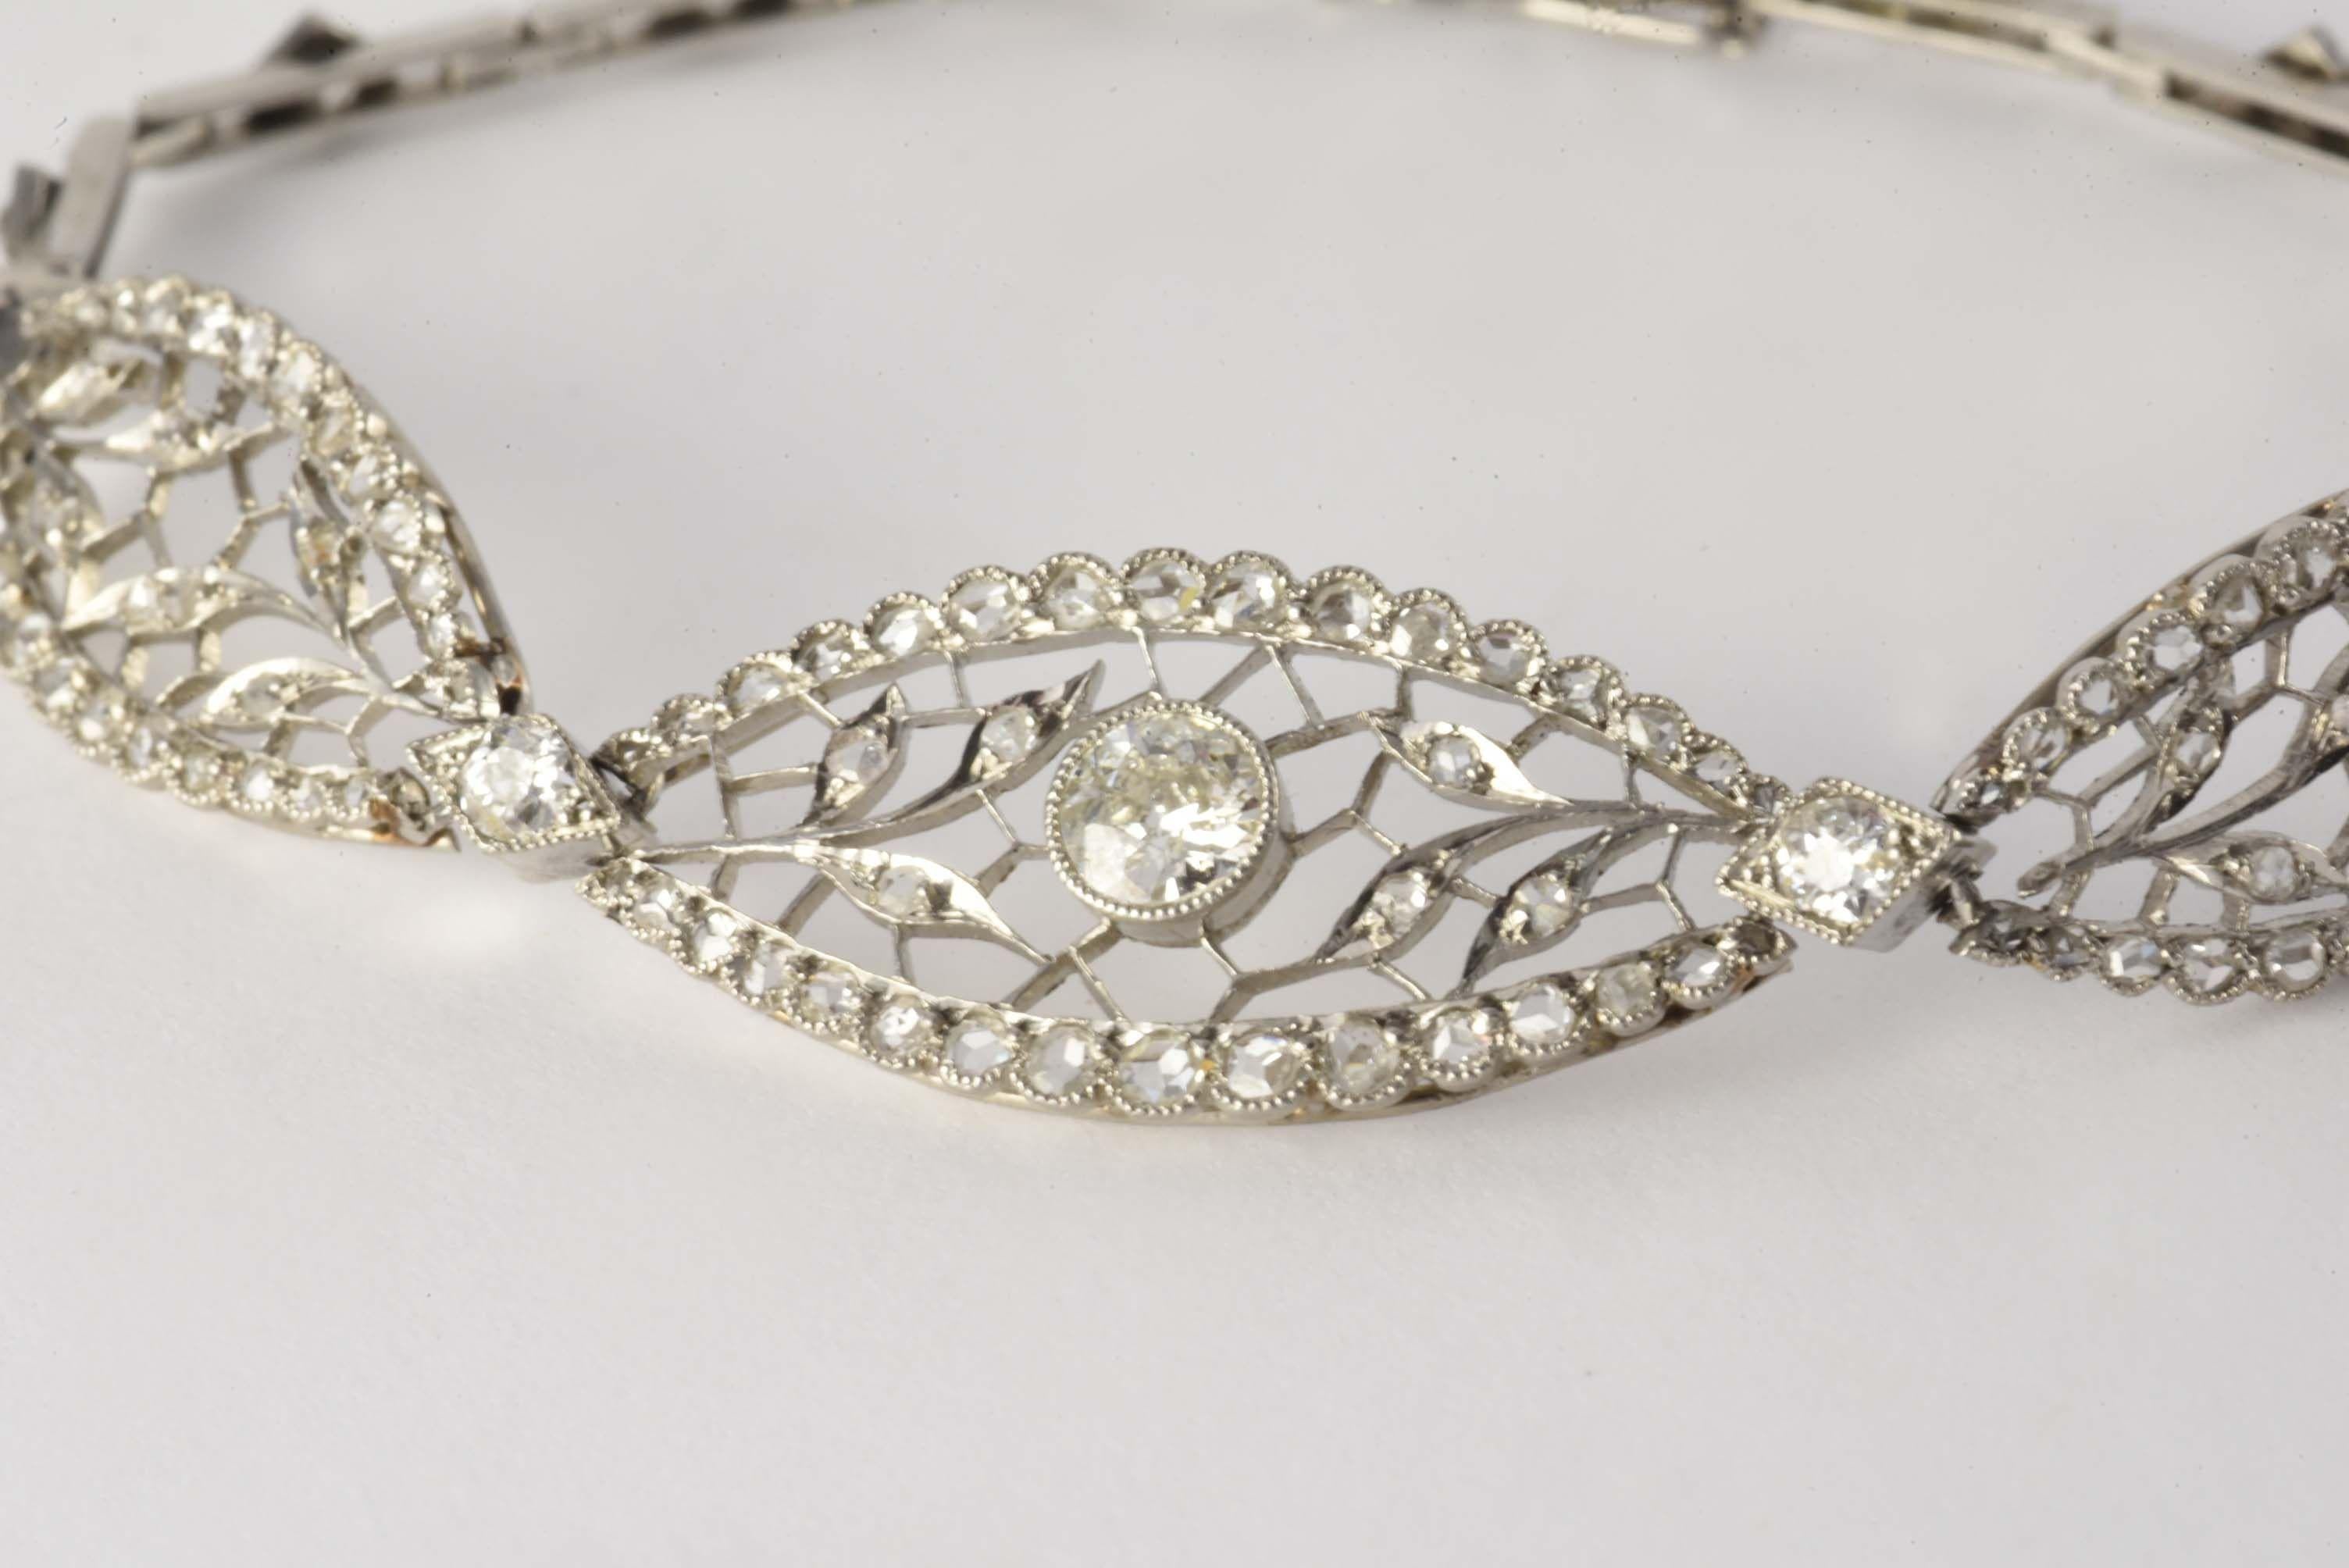 Crafted in 1915 from platinum, this exquisitely designed Belle Epoque bracelet features an Old European cut diamond center stone measuring 0.30 carats, G-H color, SI2 clarity, and adorned with rose cut diamonds and fine filigree. Diamonds total 1.35